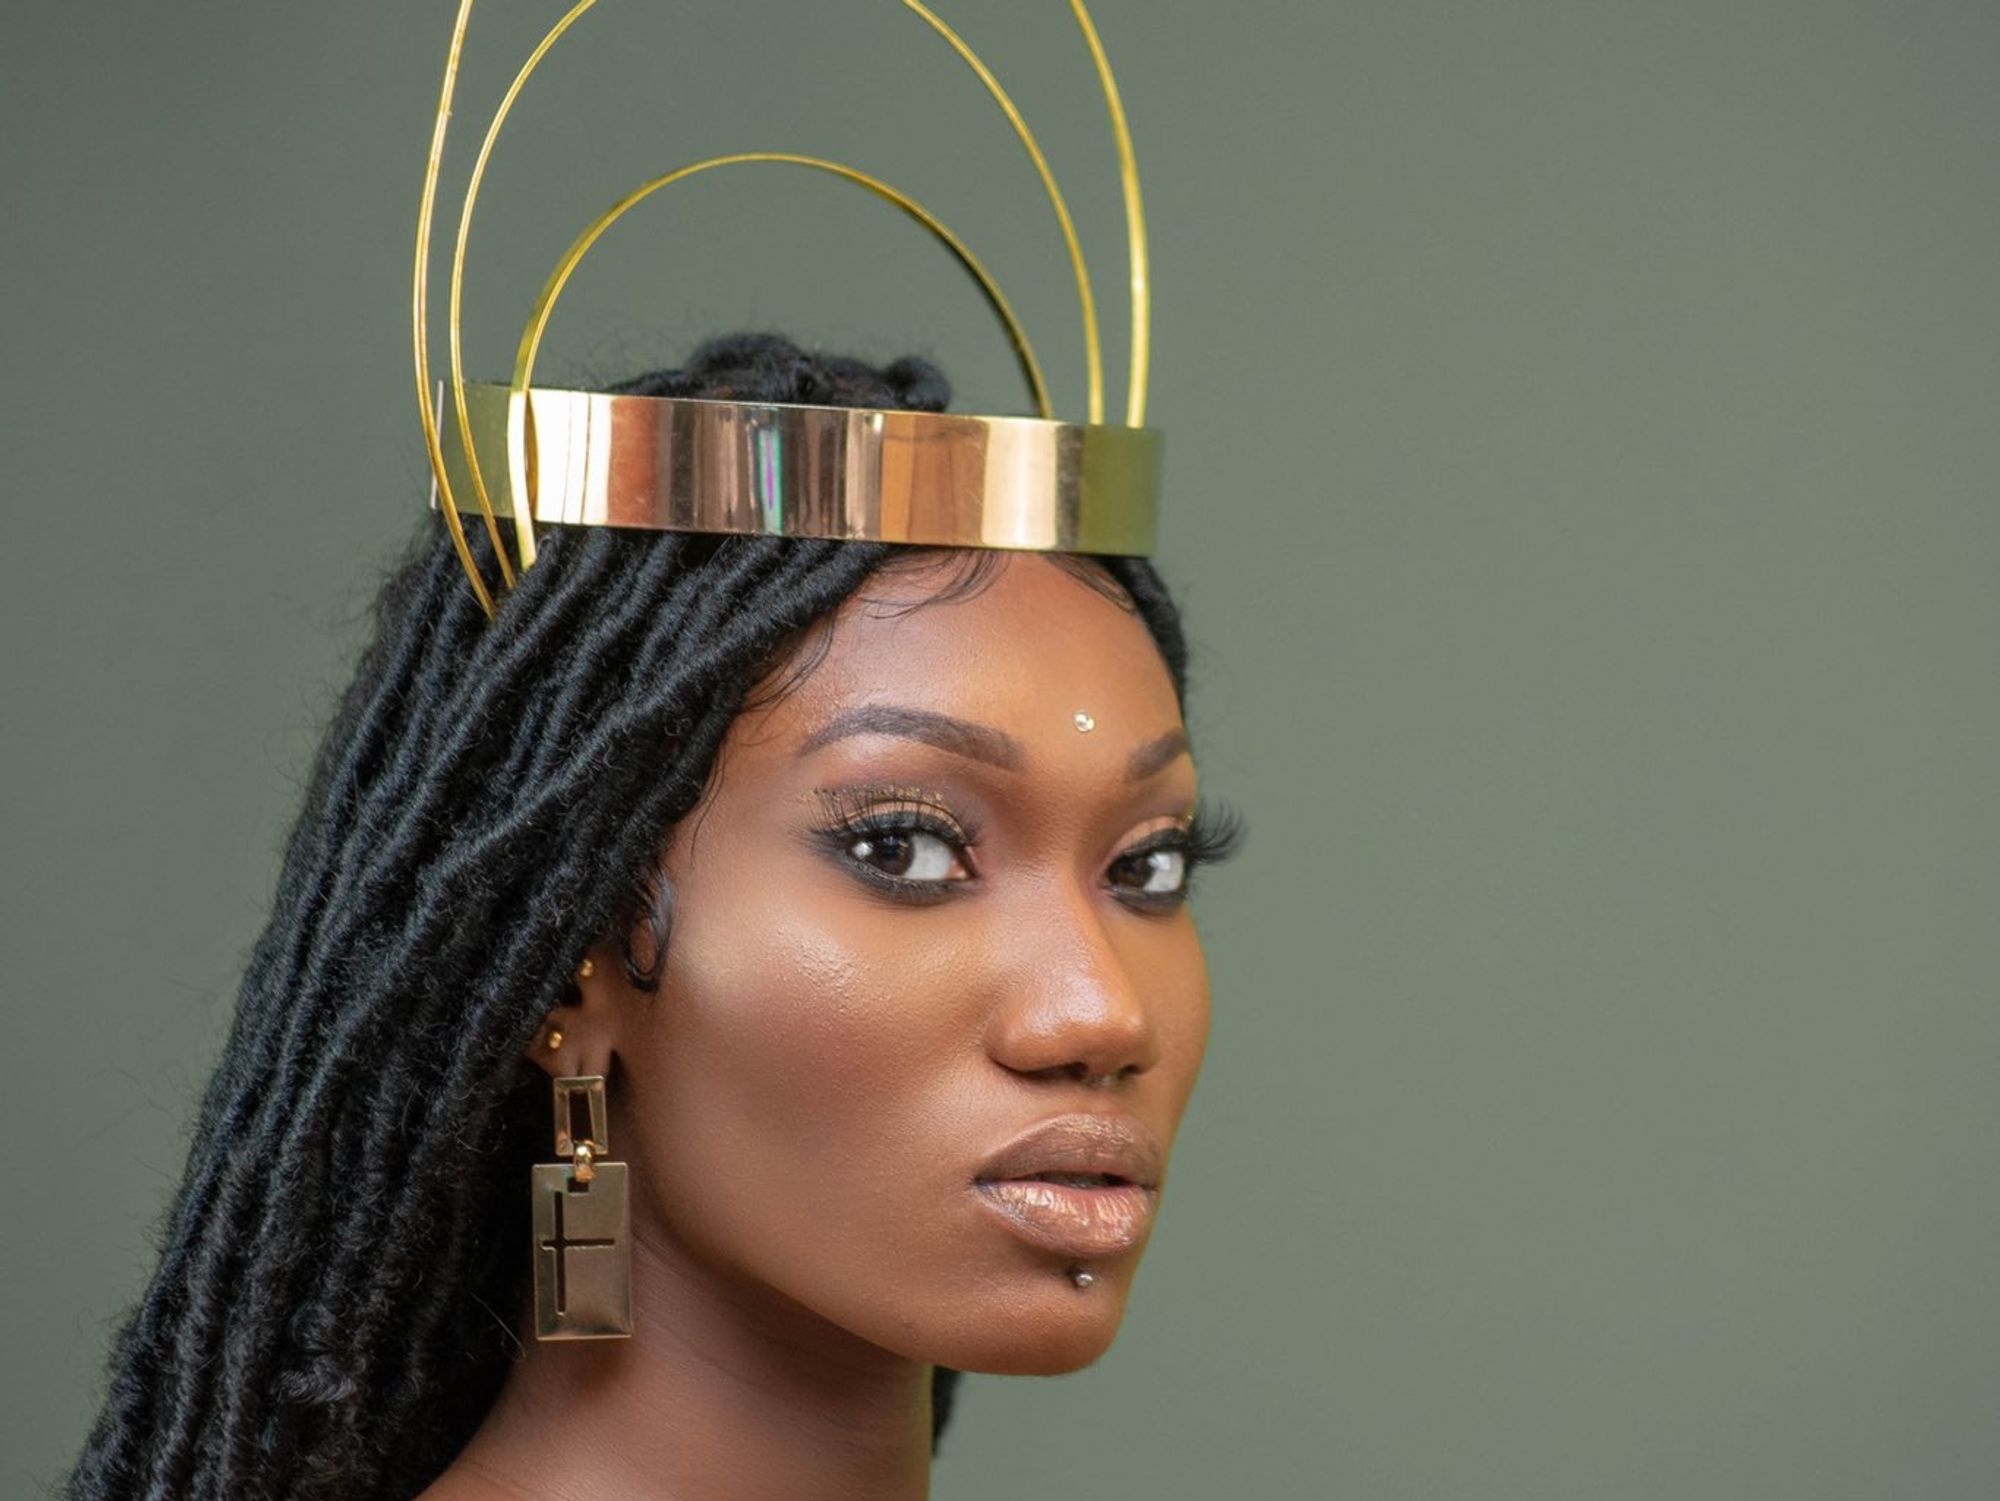 Interview: A Look Into the World of Wendy Shay